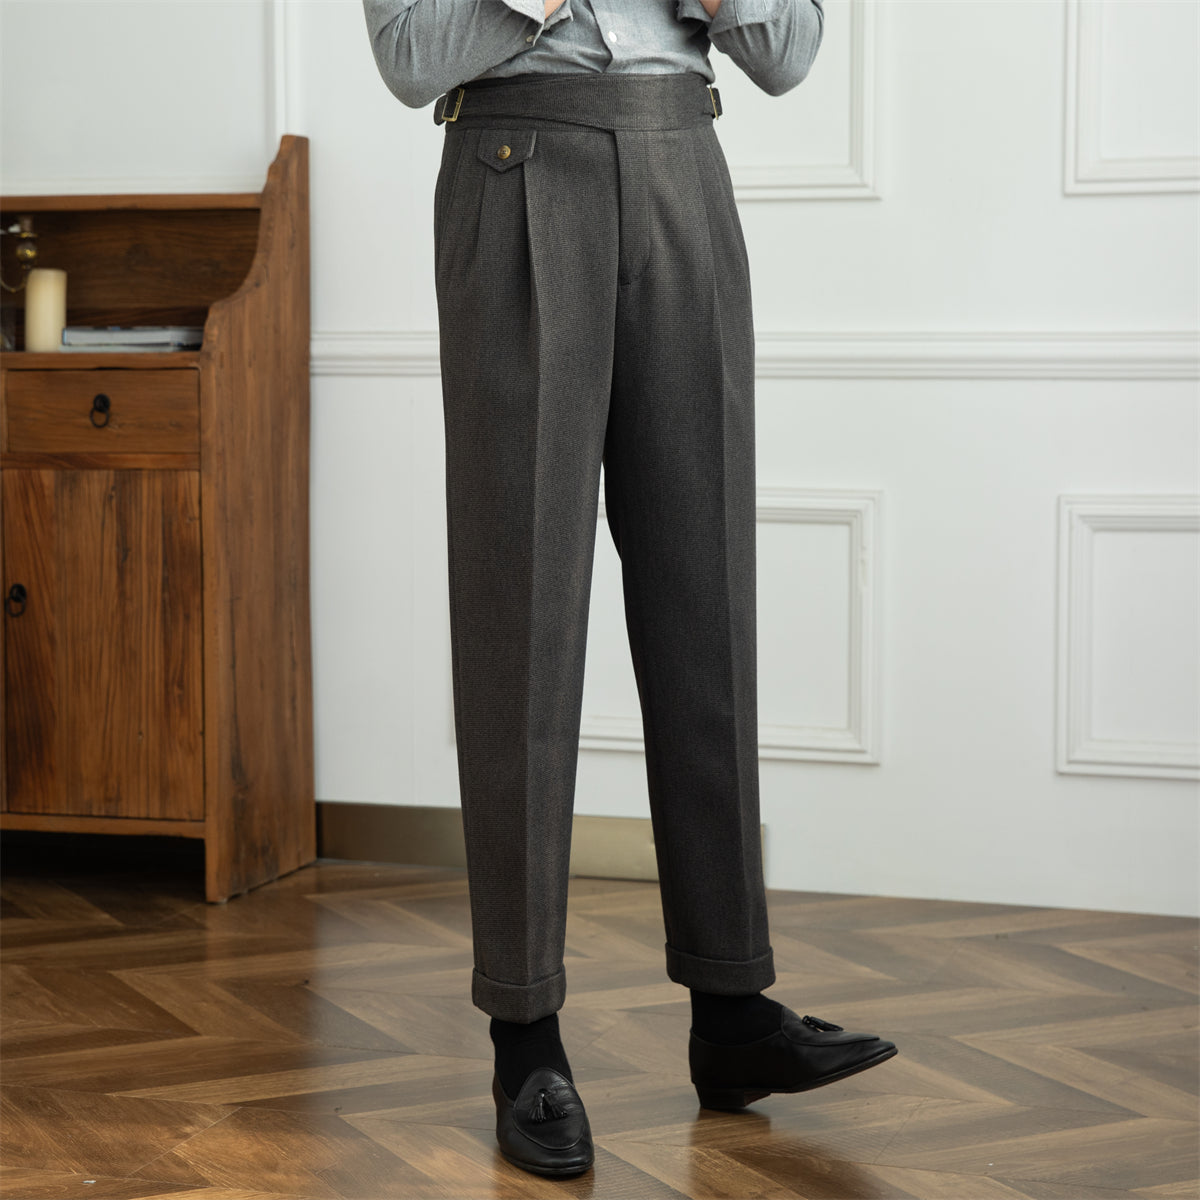 Surrey Textured Houndstooth Straight Fit Trousers